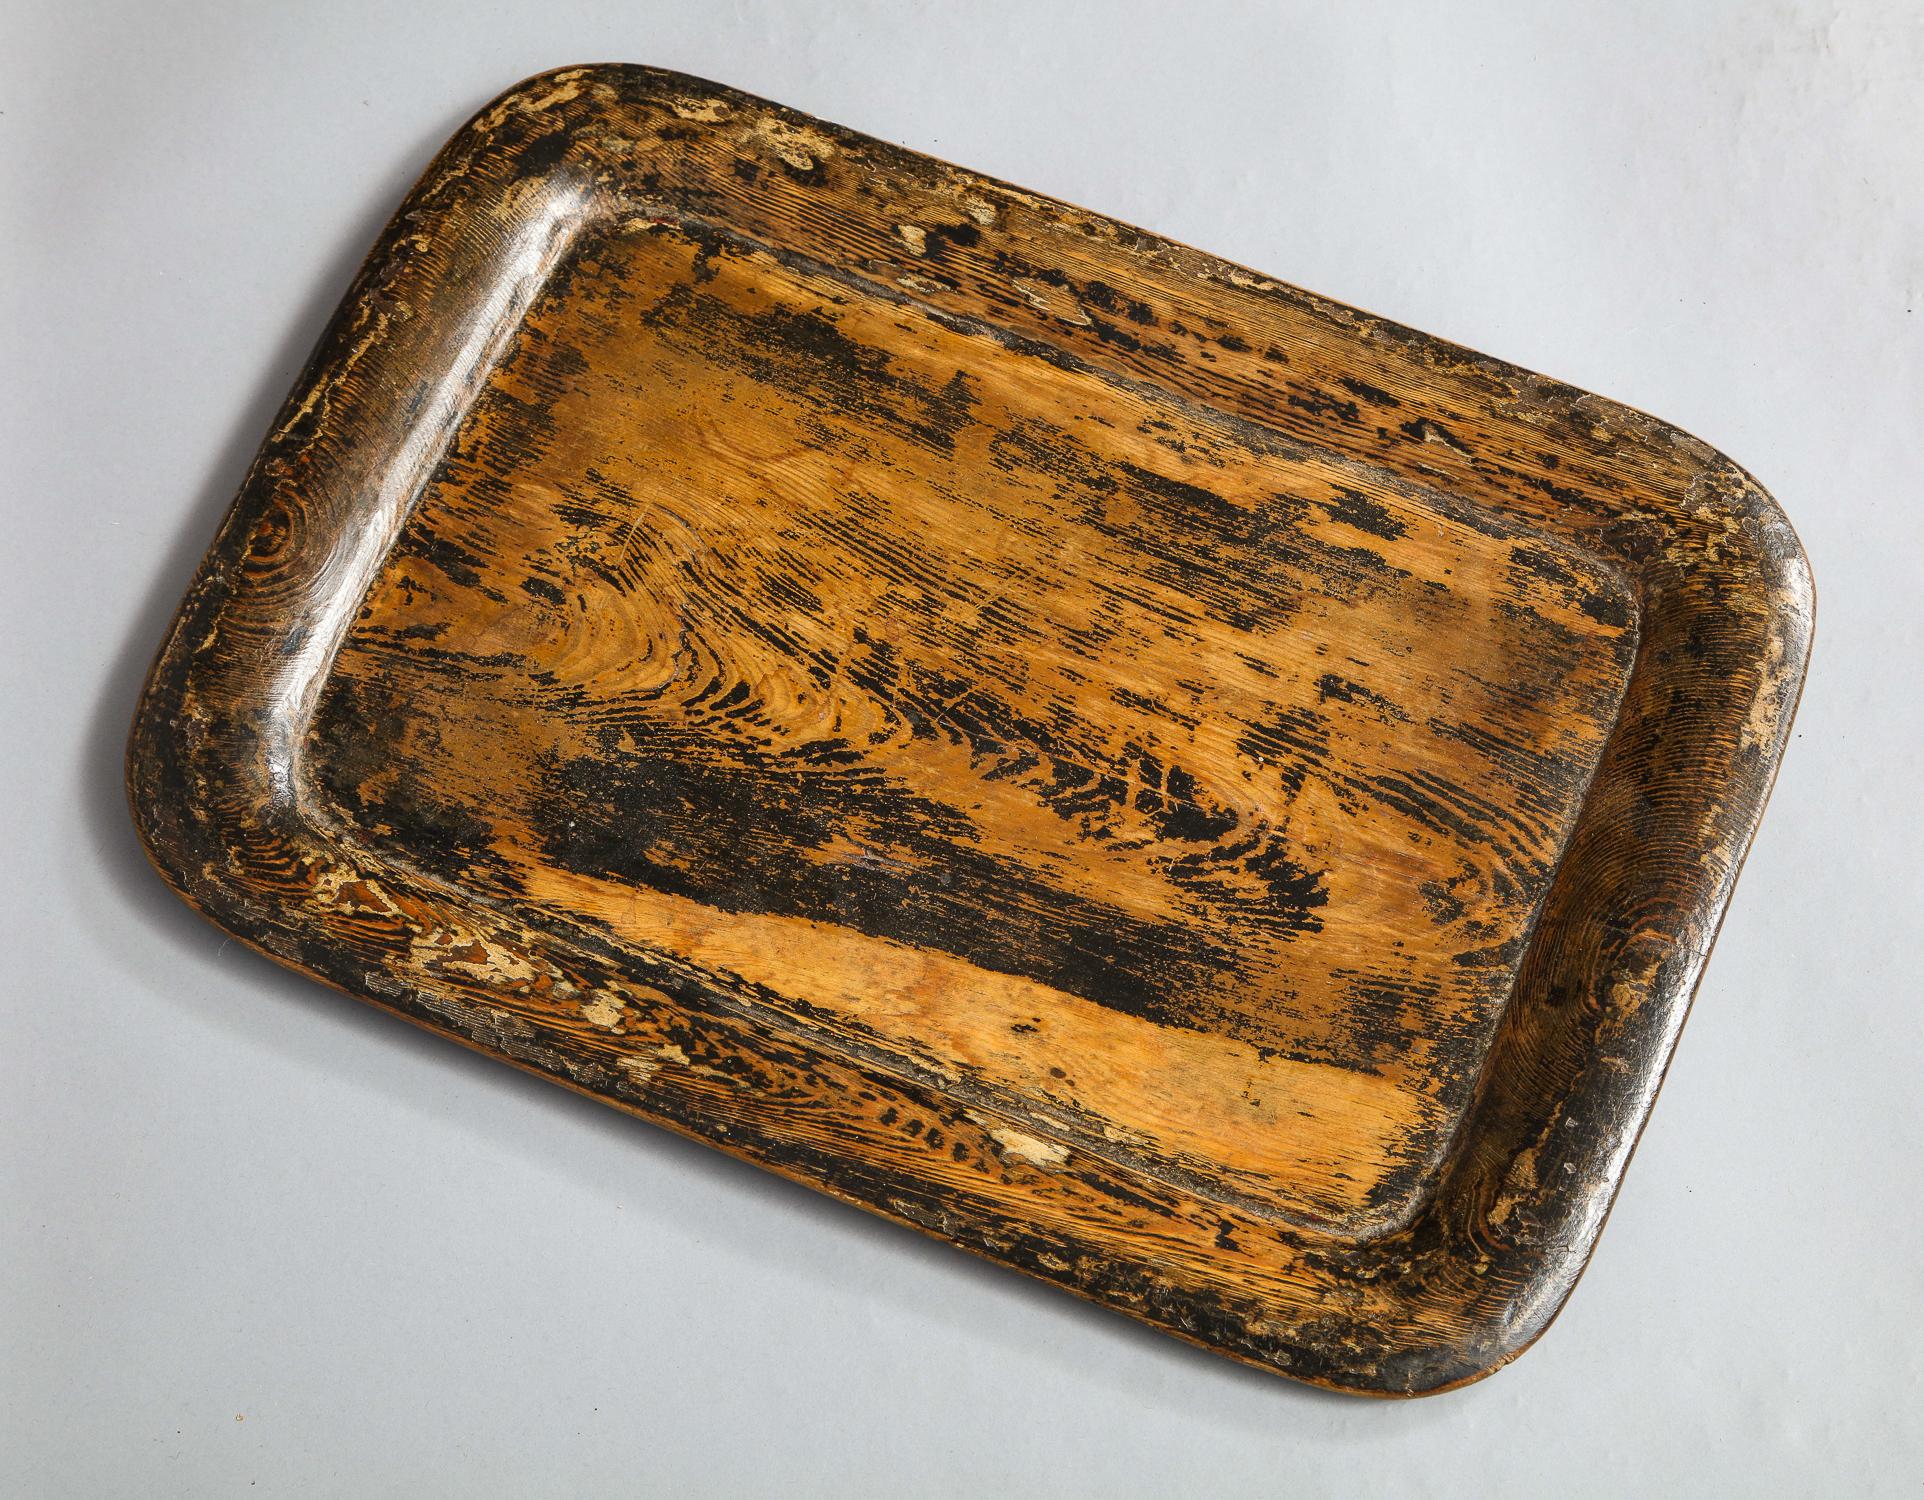 Interesting early 19th century English Folk Art carved and painted wooden tray with traces of original paint. This tray is a charming example a country craftsperson attempting to imitate a more high style lacquer or papier mâché tray using the